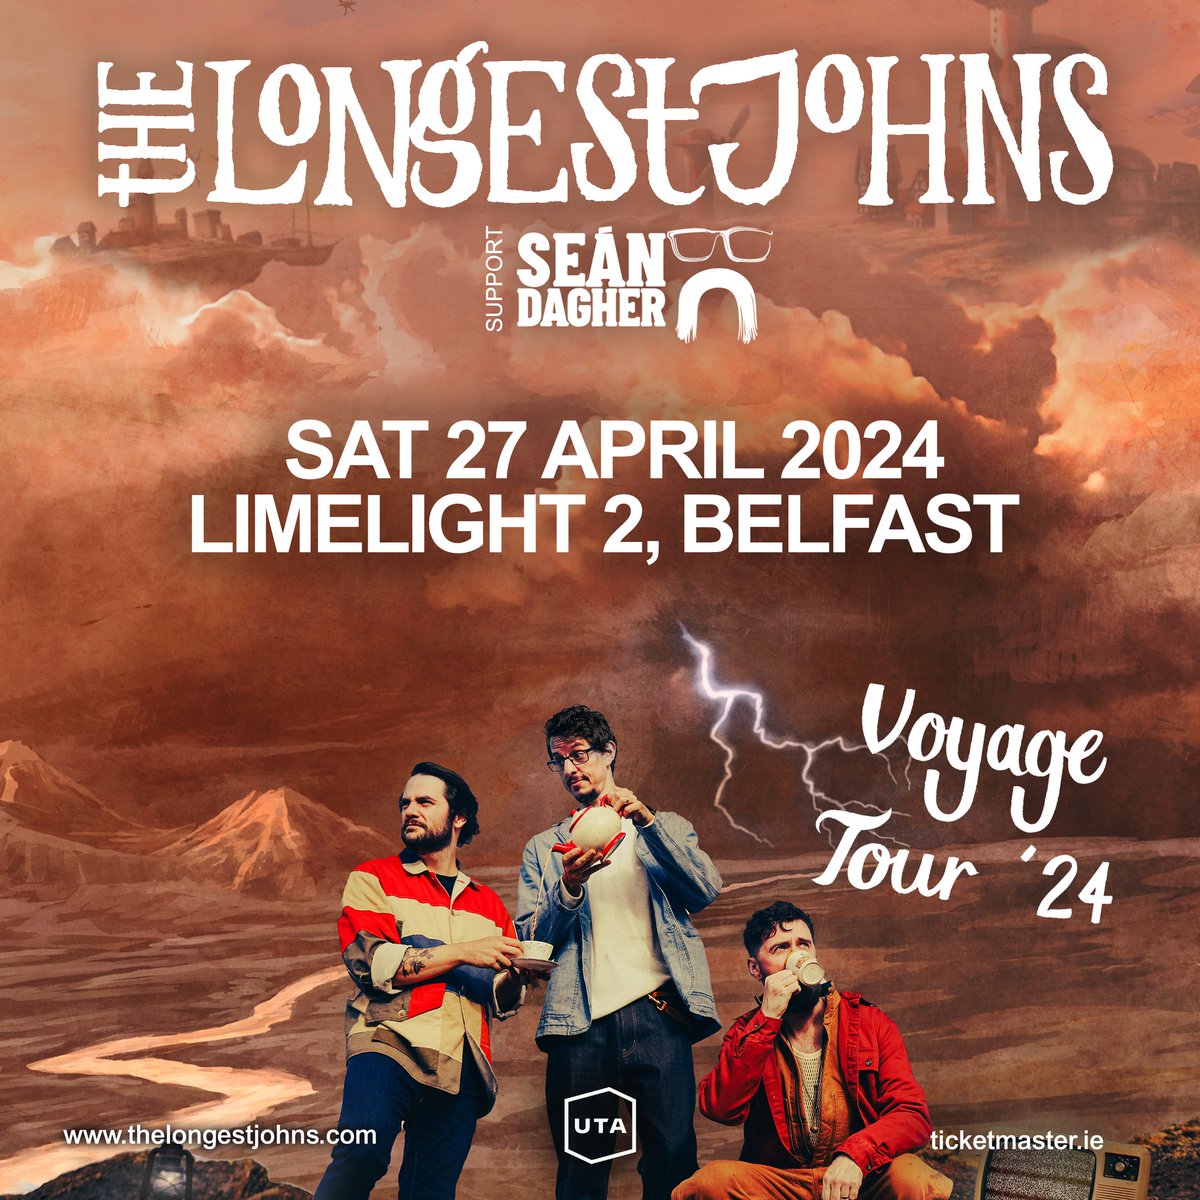 𝐍𝐎𝐓 𝐋𝐎𝐍𝐆 𝐔𝐍𝐓𝐈𝐋 British Folk musicians @TheLongestJohns take to The Limelight with special guest & multi-instrumentalist @seandagher on April 27th! Remaining tickets 👉🏼 bit.ly/TLJApr27